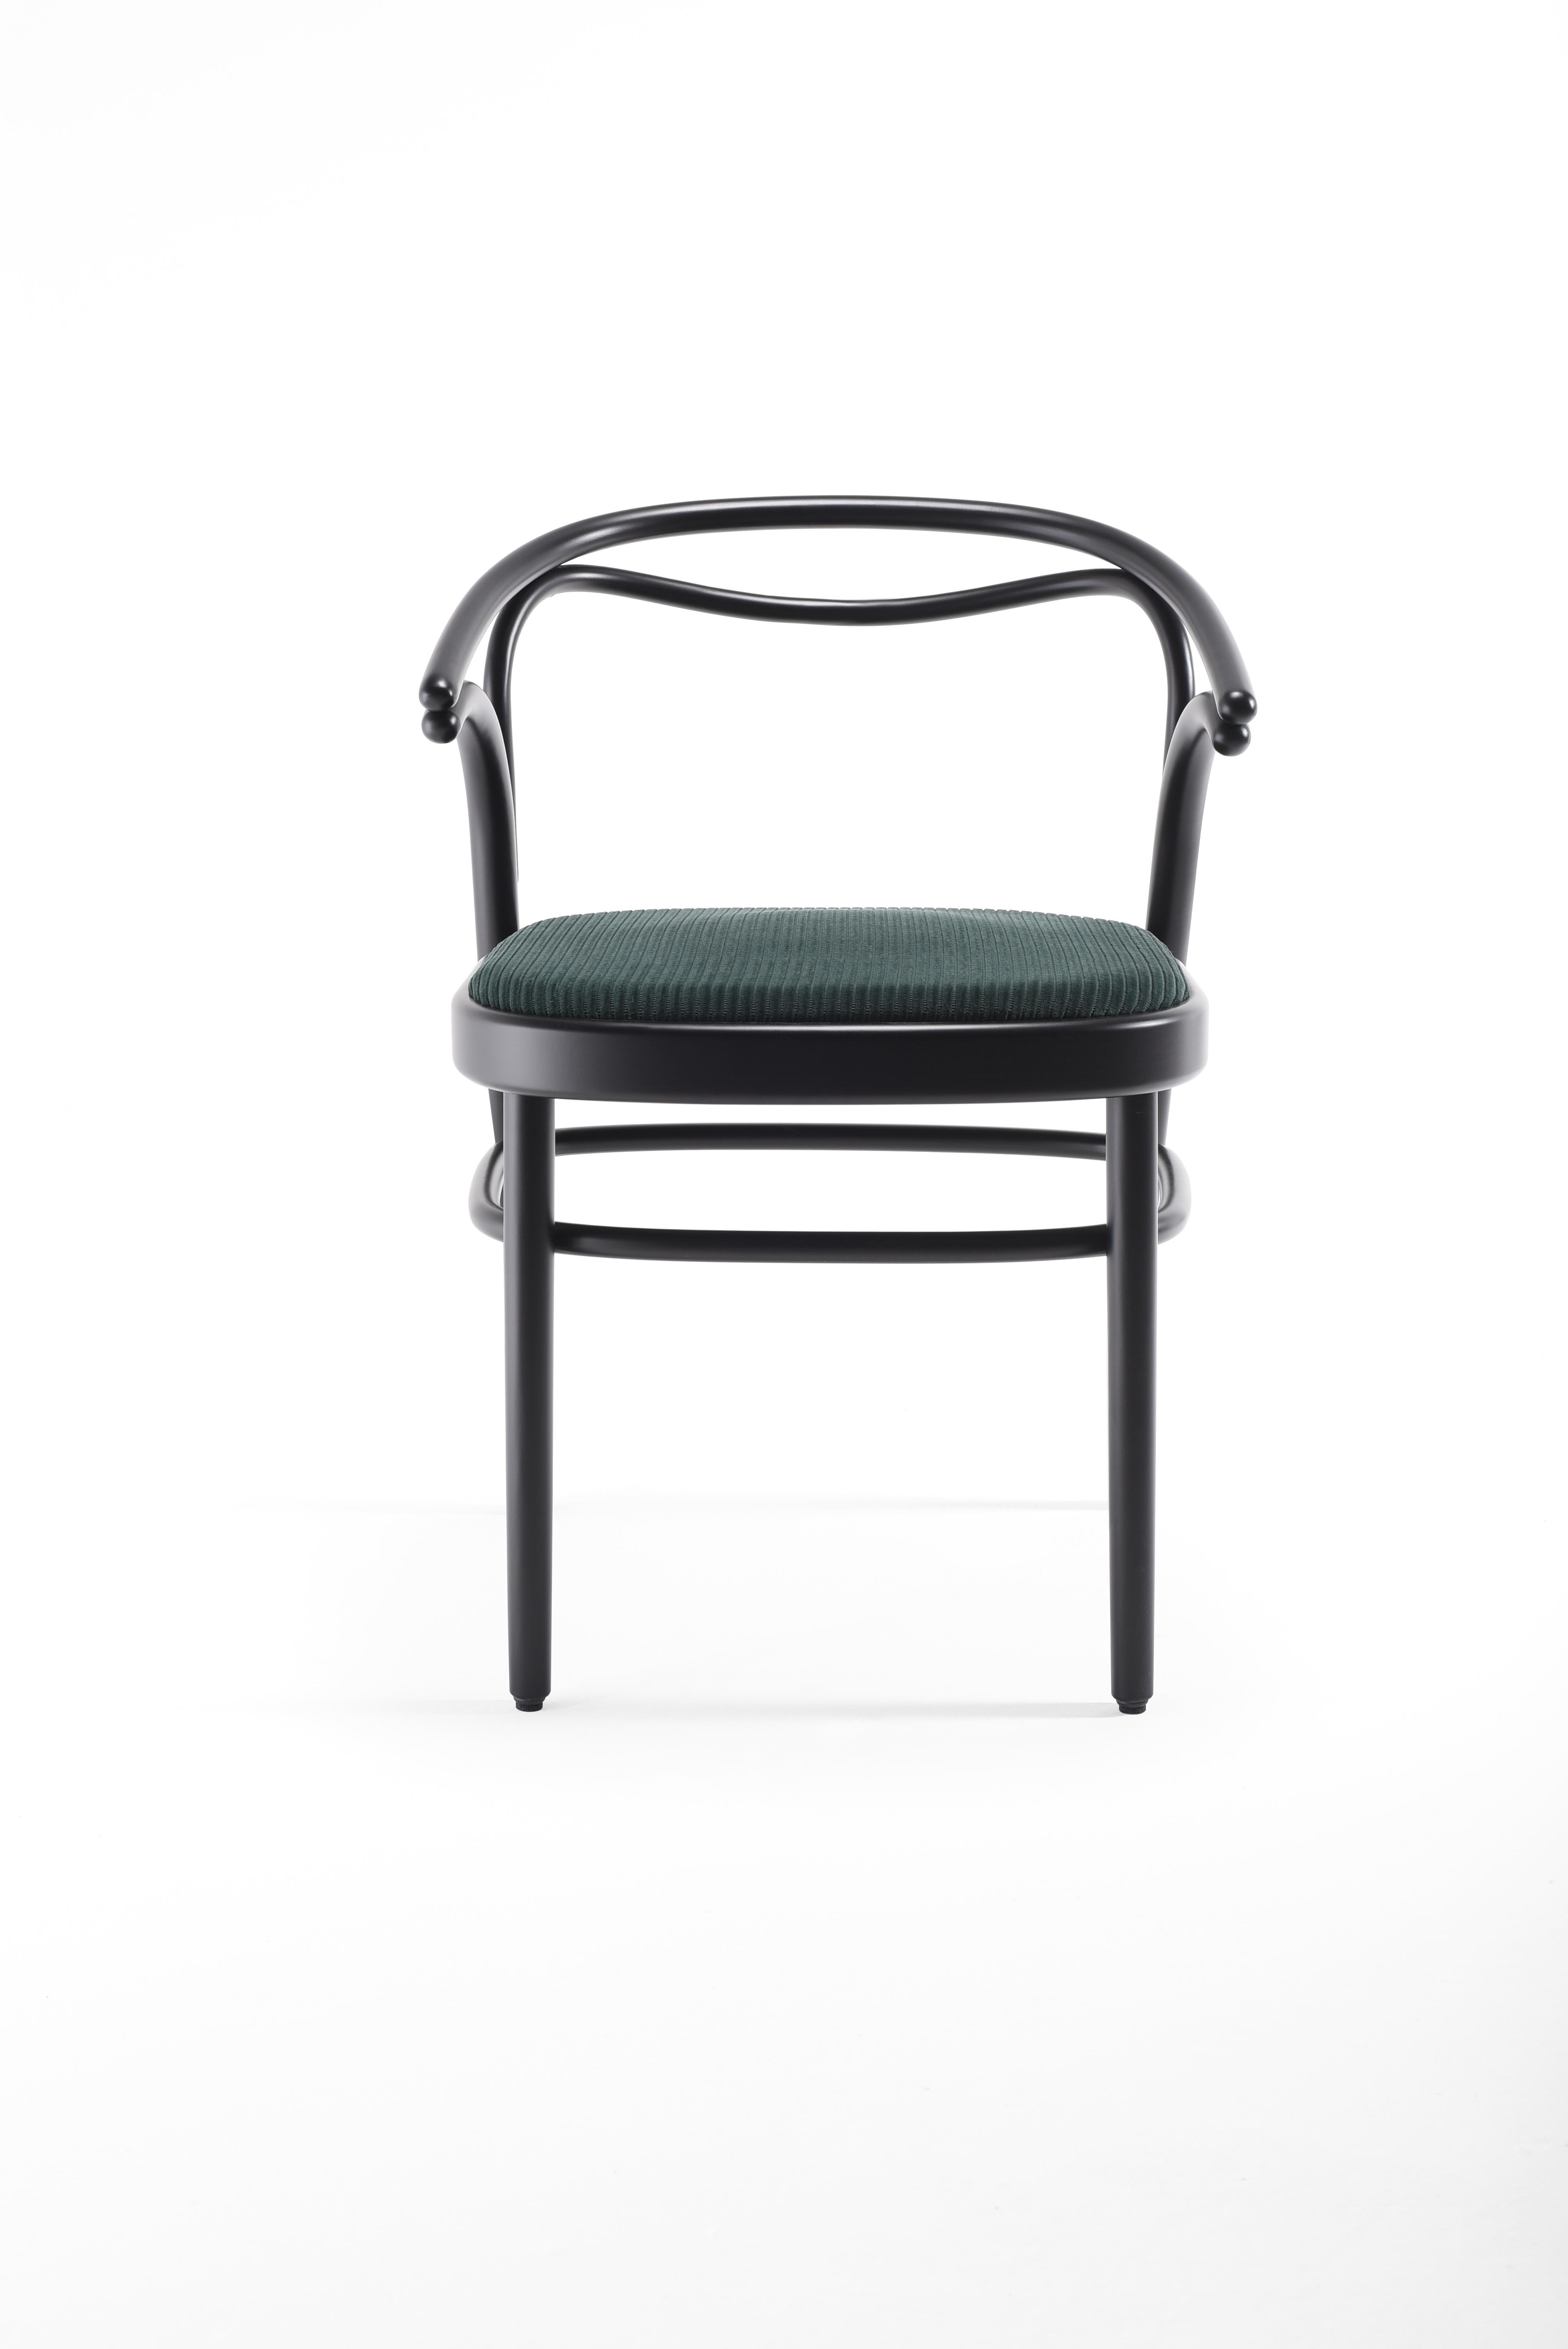 Austrian Gebrüder Thonet Vienna Beaulieu Armchair with Upholstered Seat by Philippe Nigro For Sale